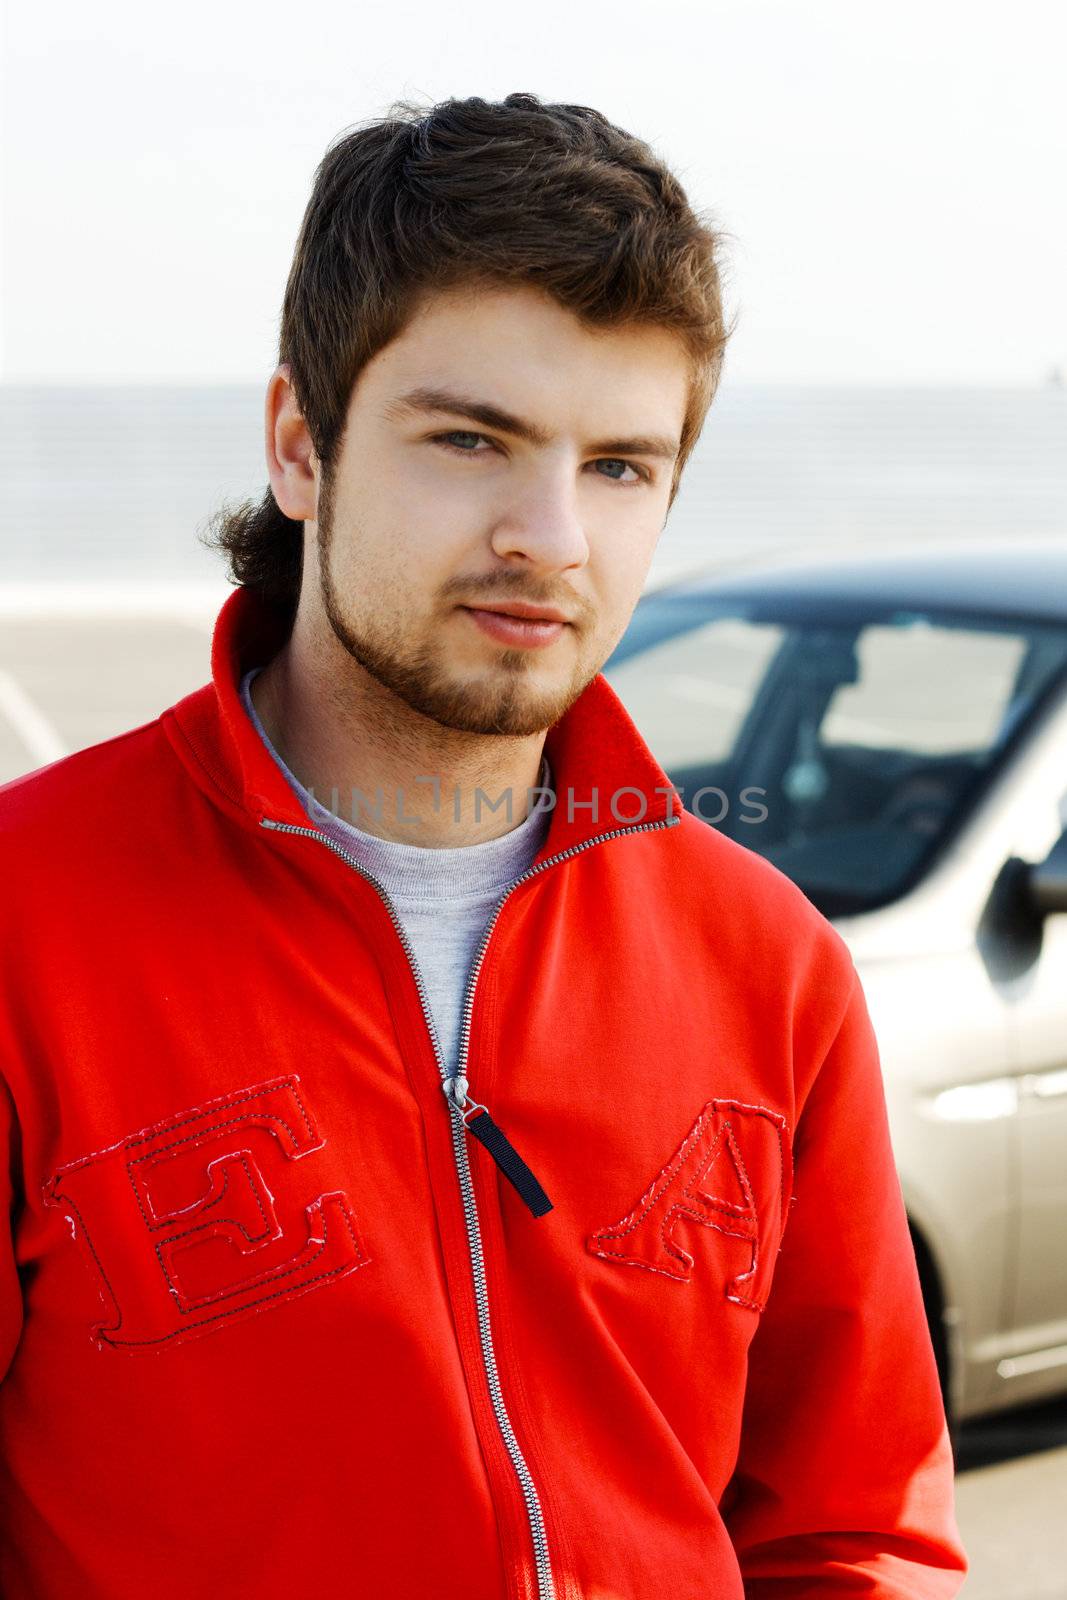 Hansdsome young man in red jacket